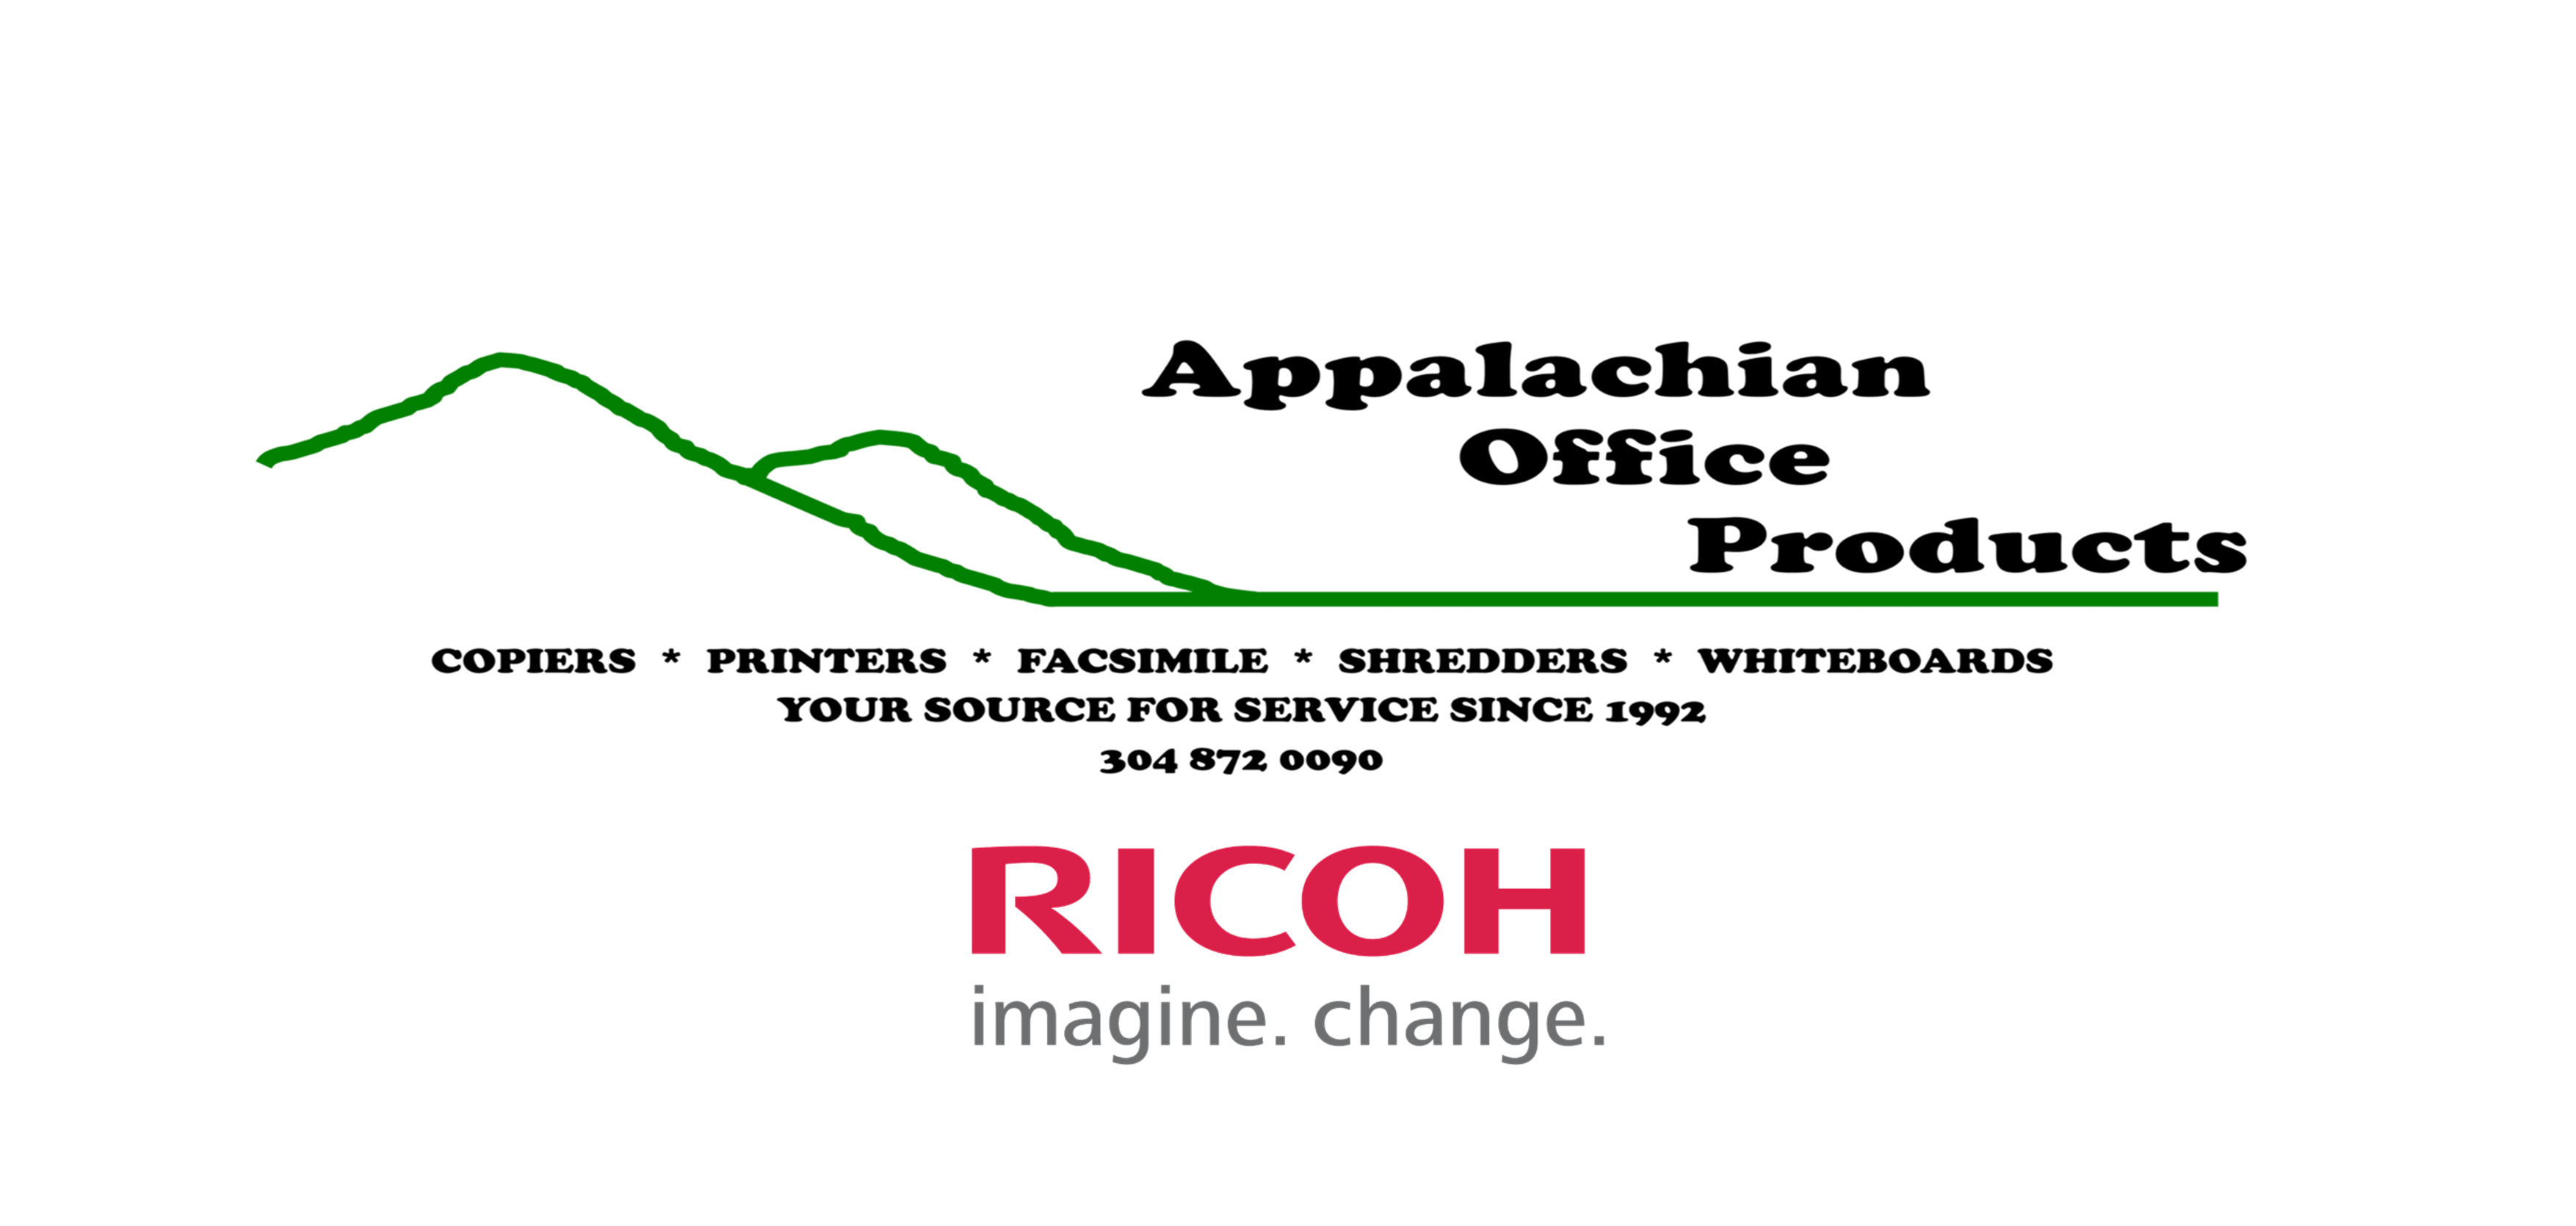 APPALACHIAN OFFICE PRODUCTS